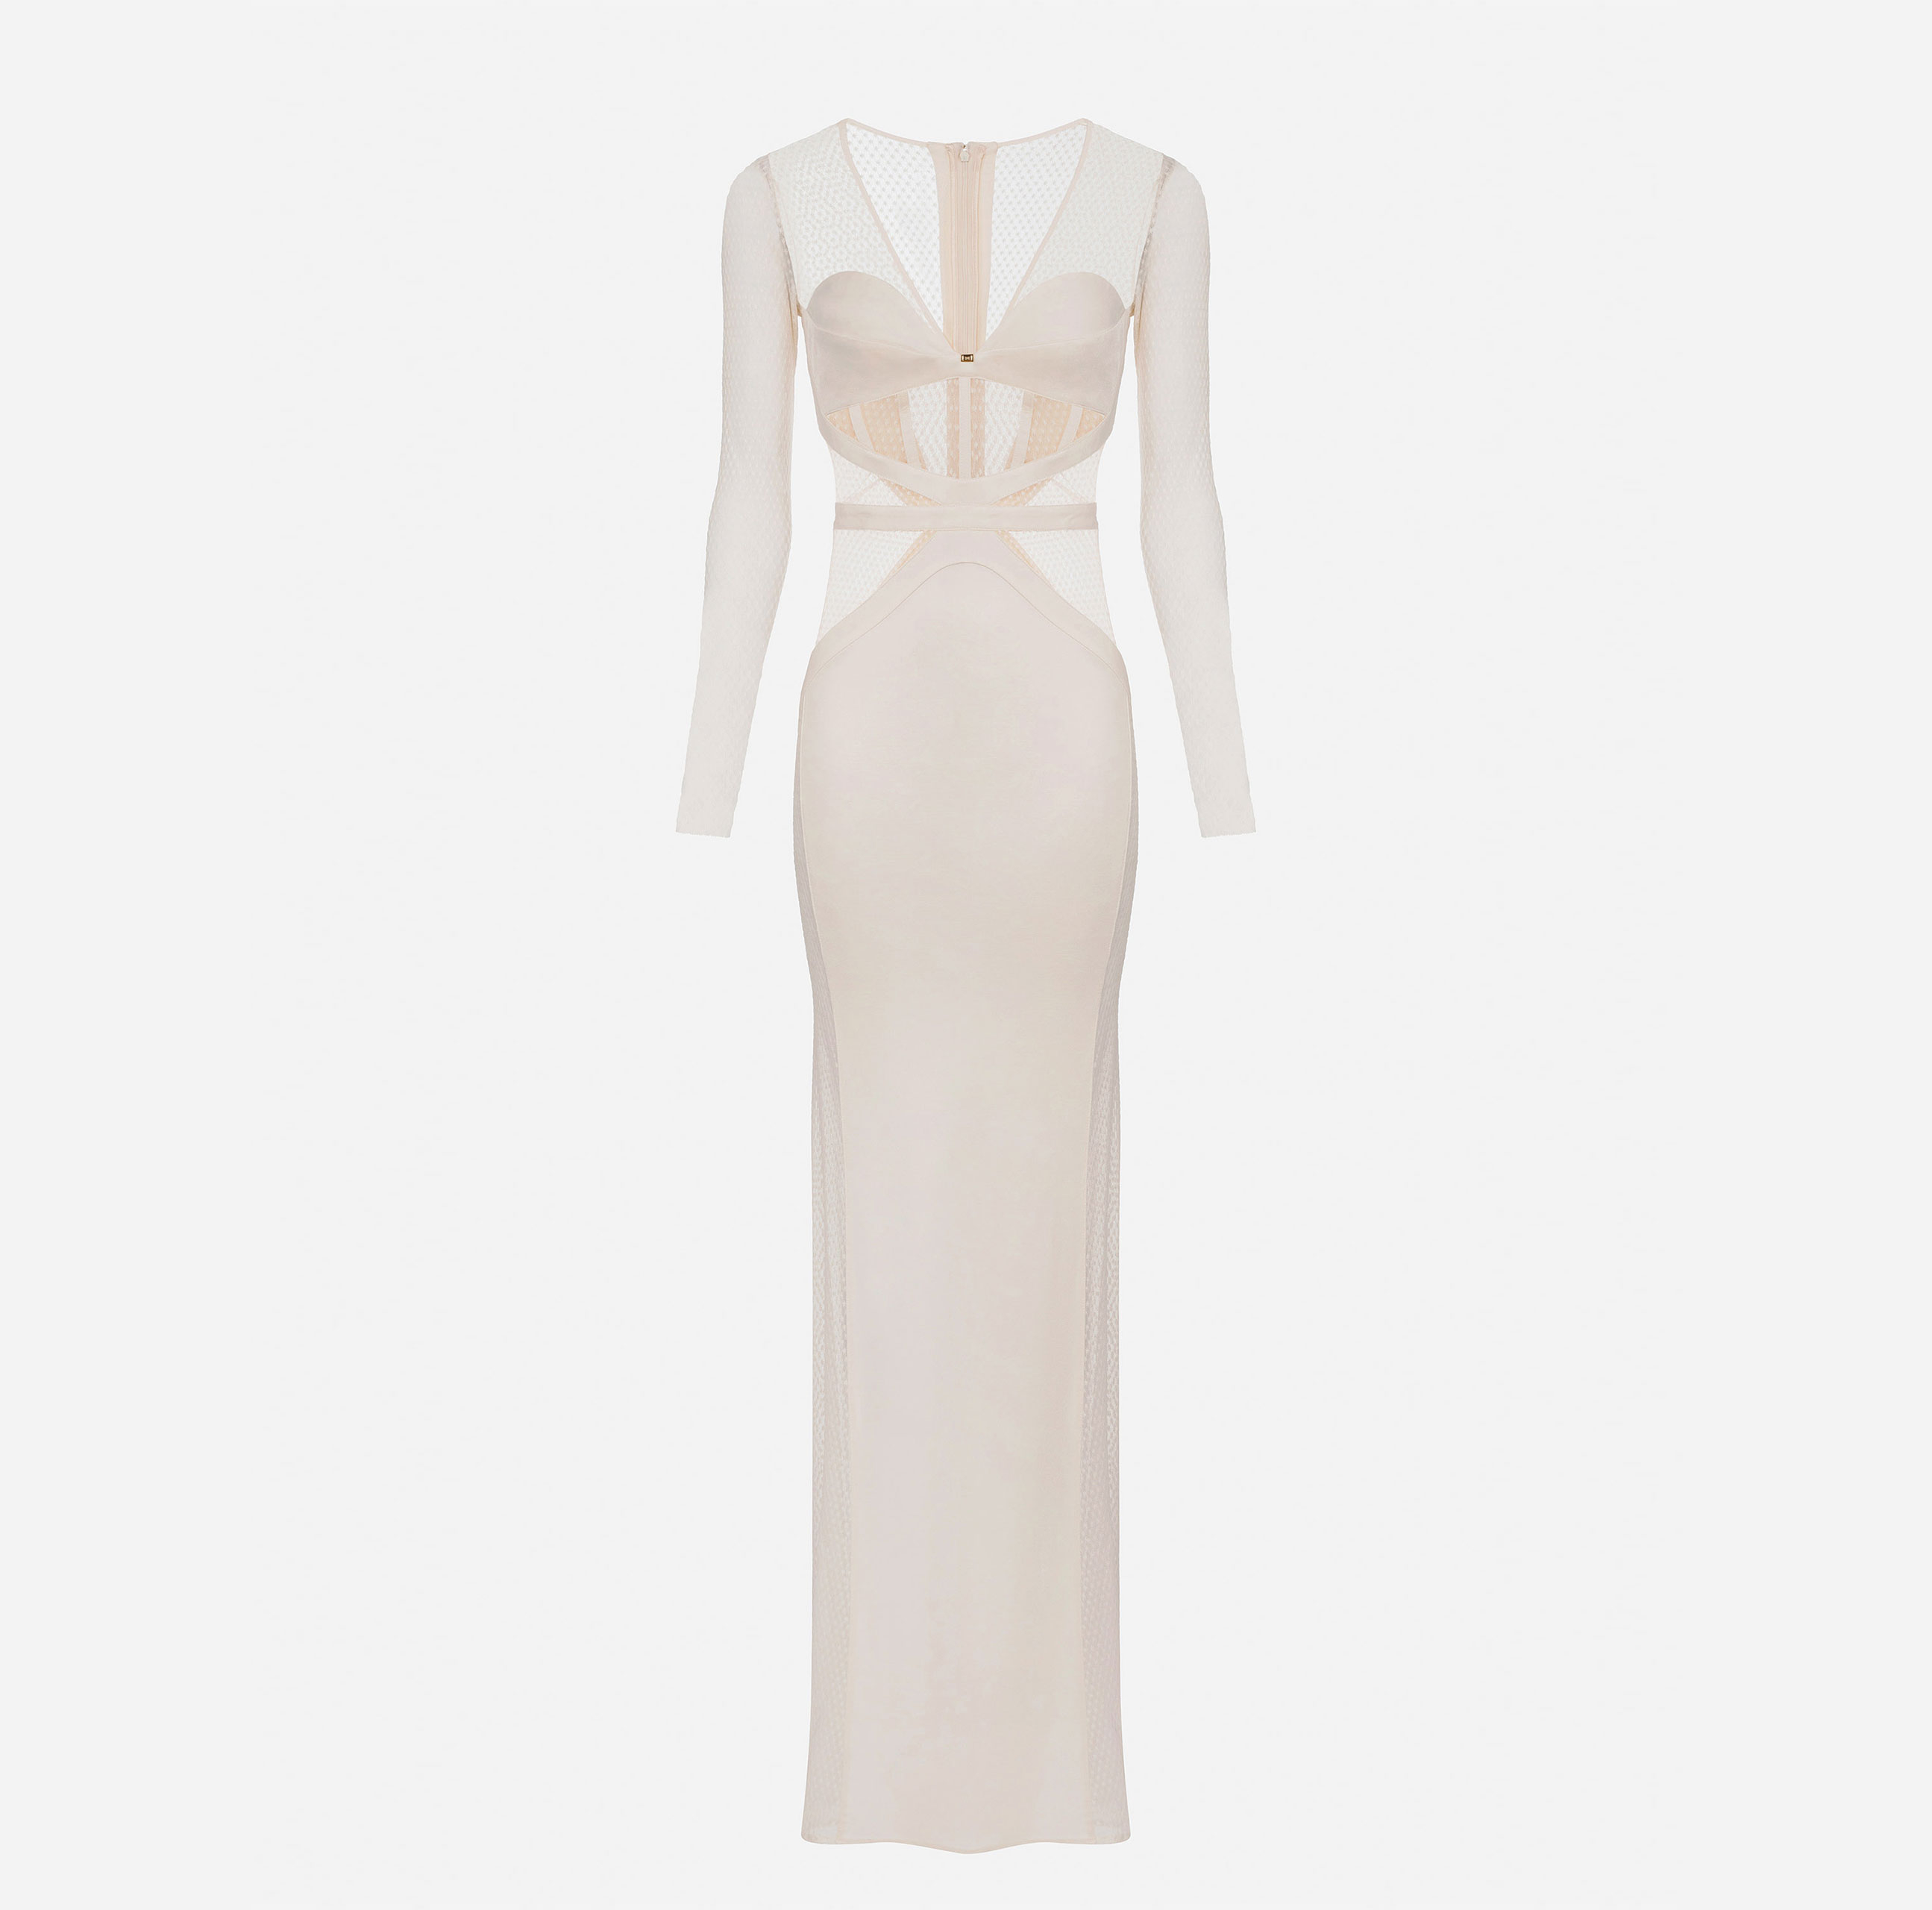 Red carpet cut out dress in tulle - Elisabetta Franchi